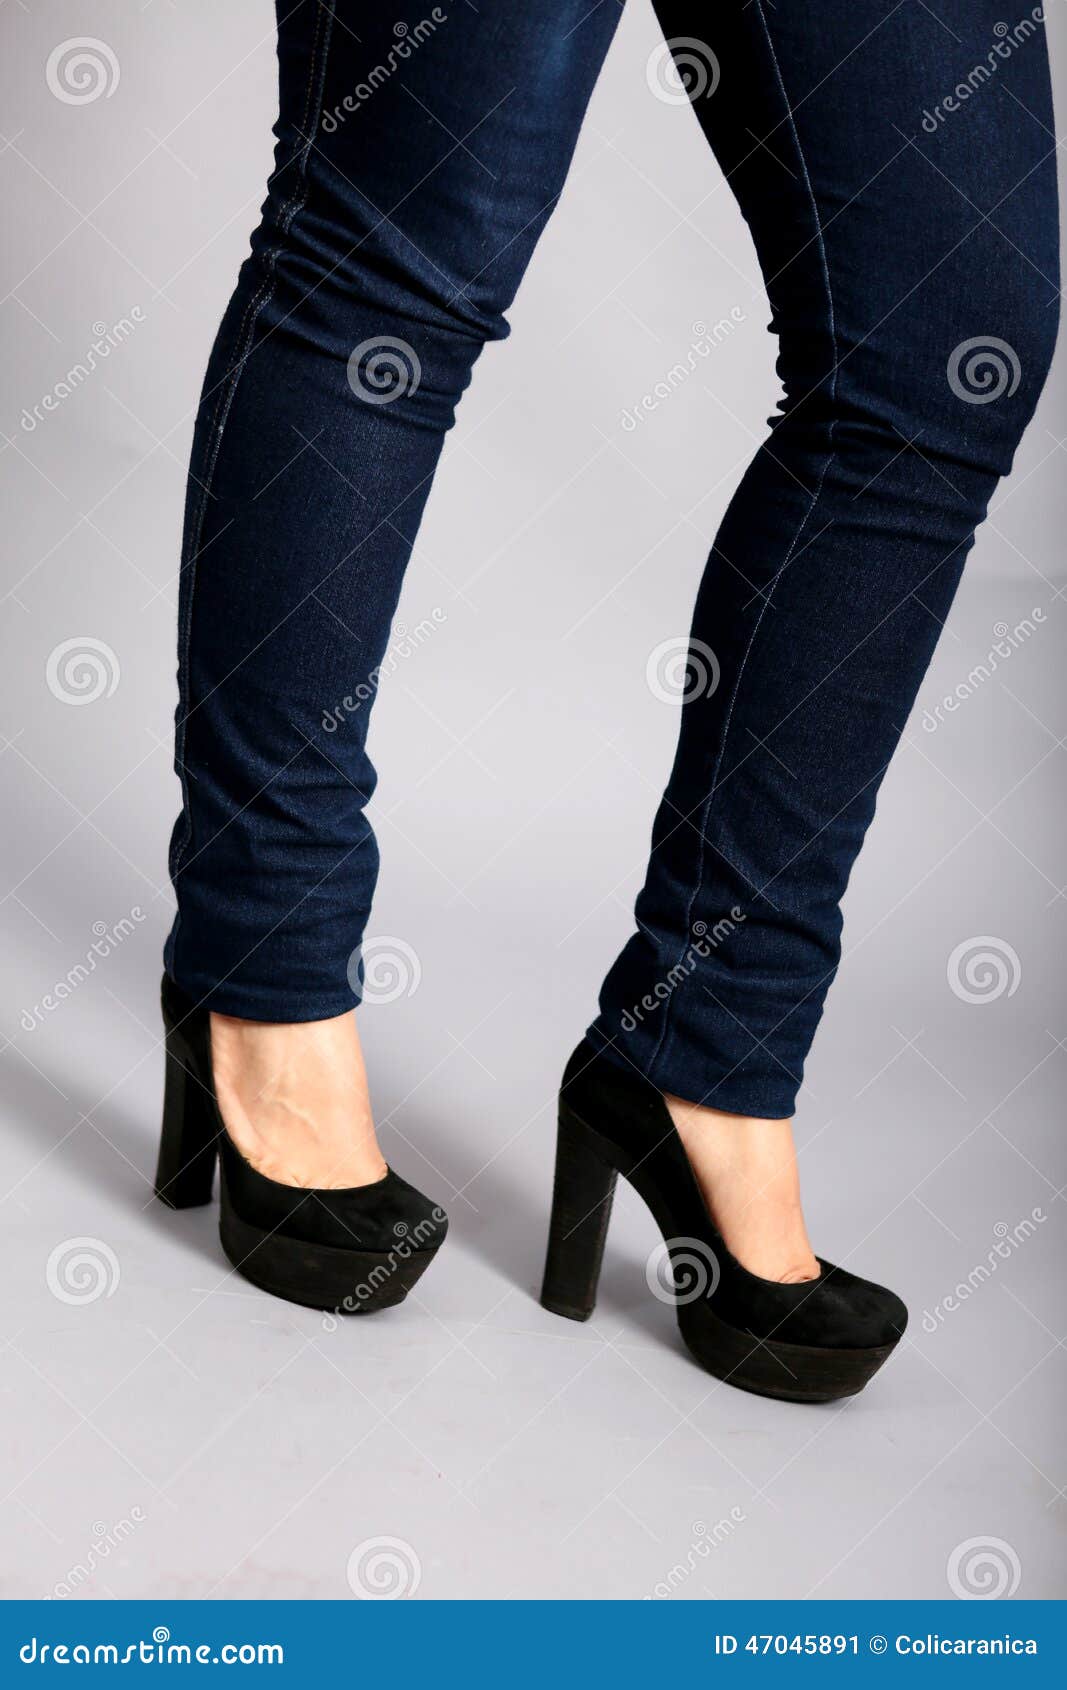 Women Wear Jeans Modern Fashion and Black High Heels she Standing Road in  Old Town Stock Image - Image of black, footwear: 251580177